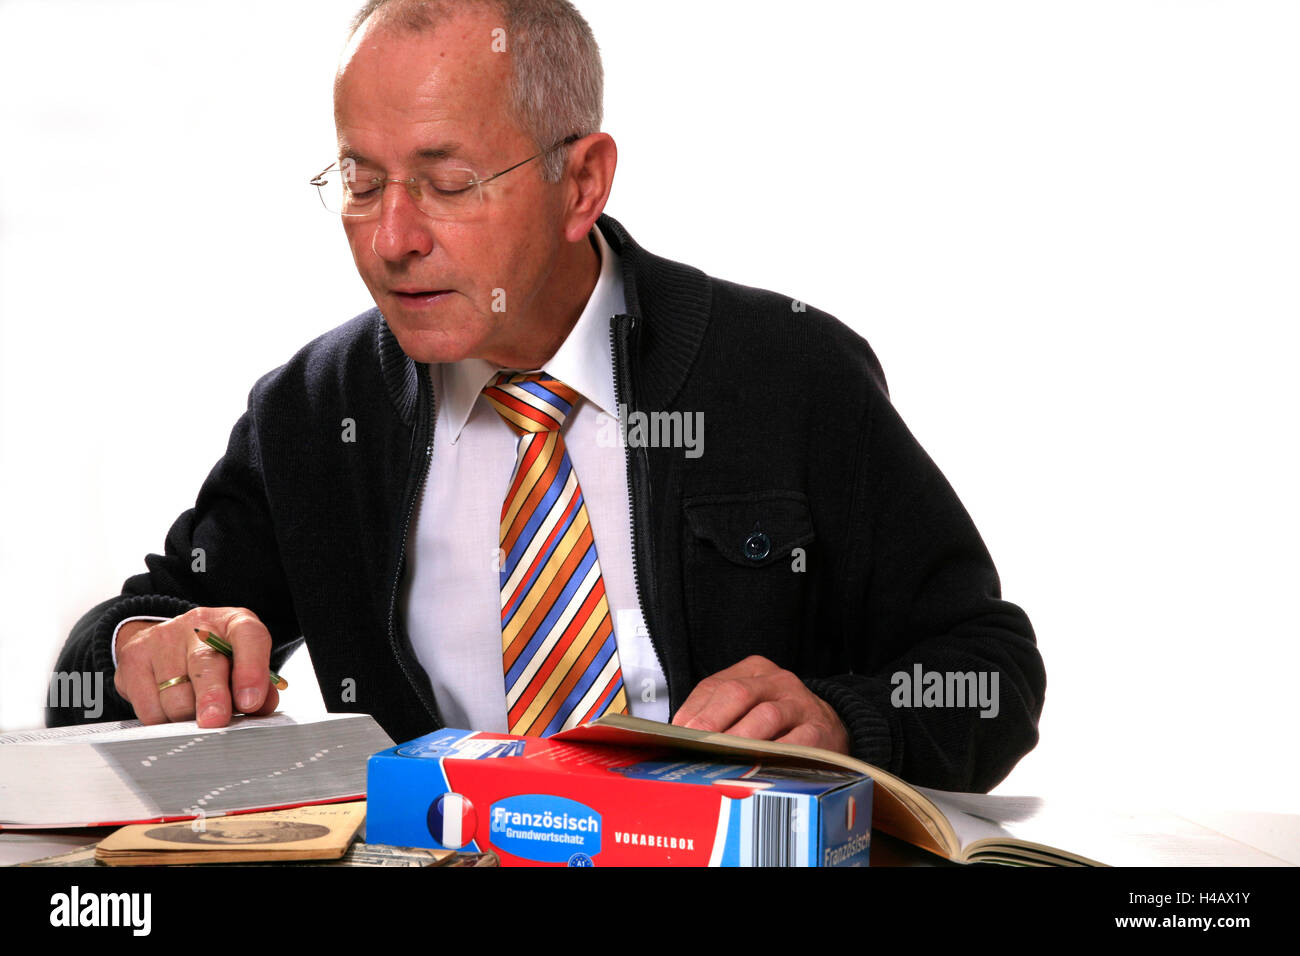 Man, interior, learning foreign language, Stock Photo